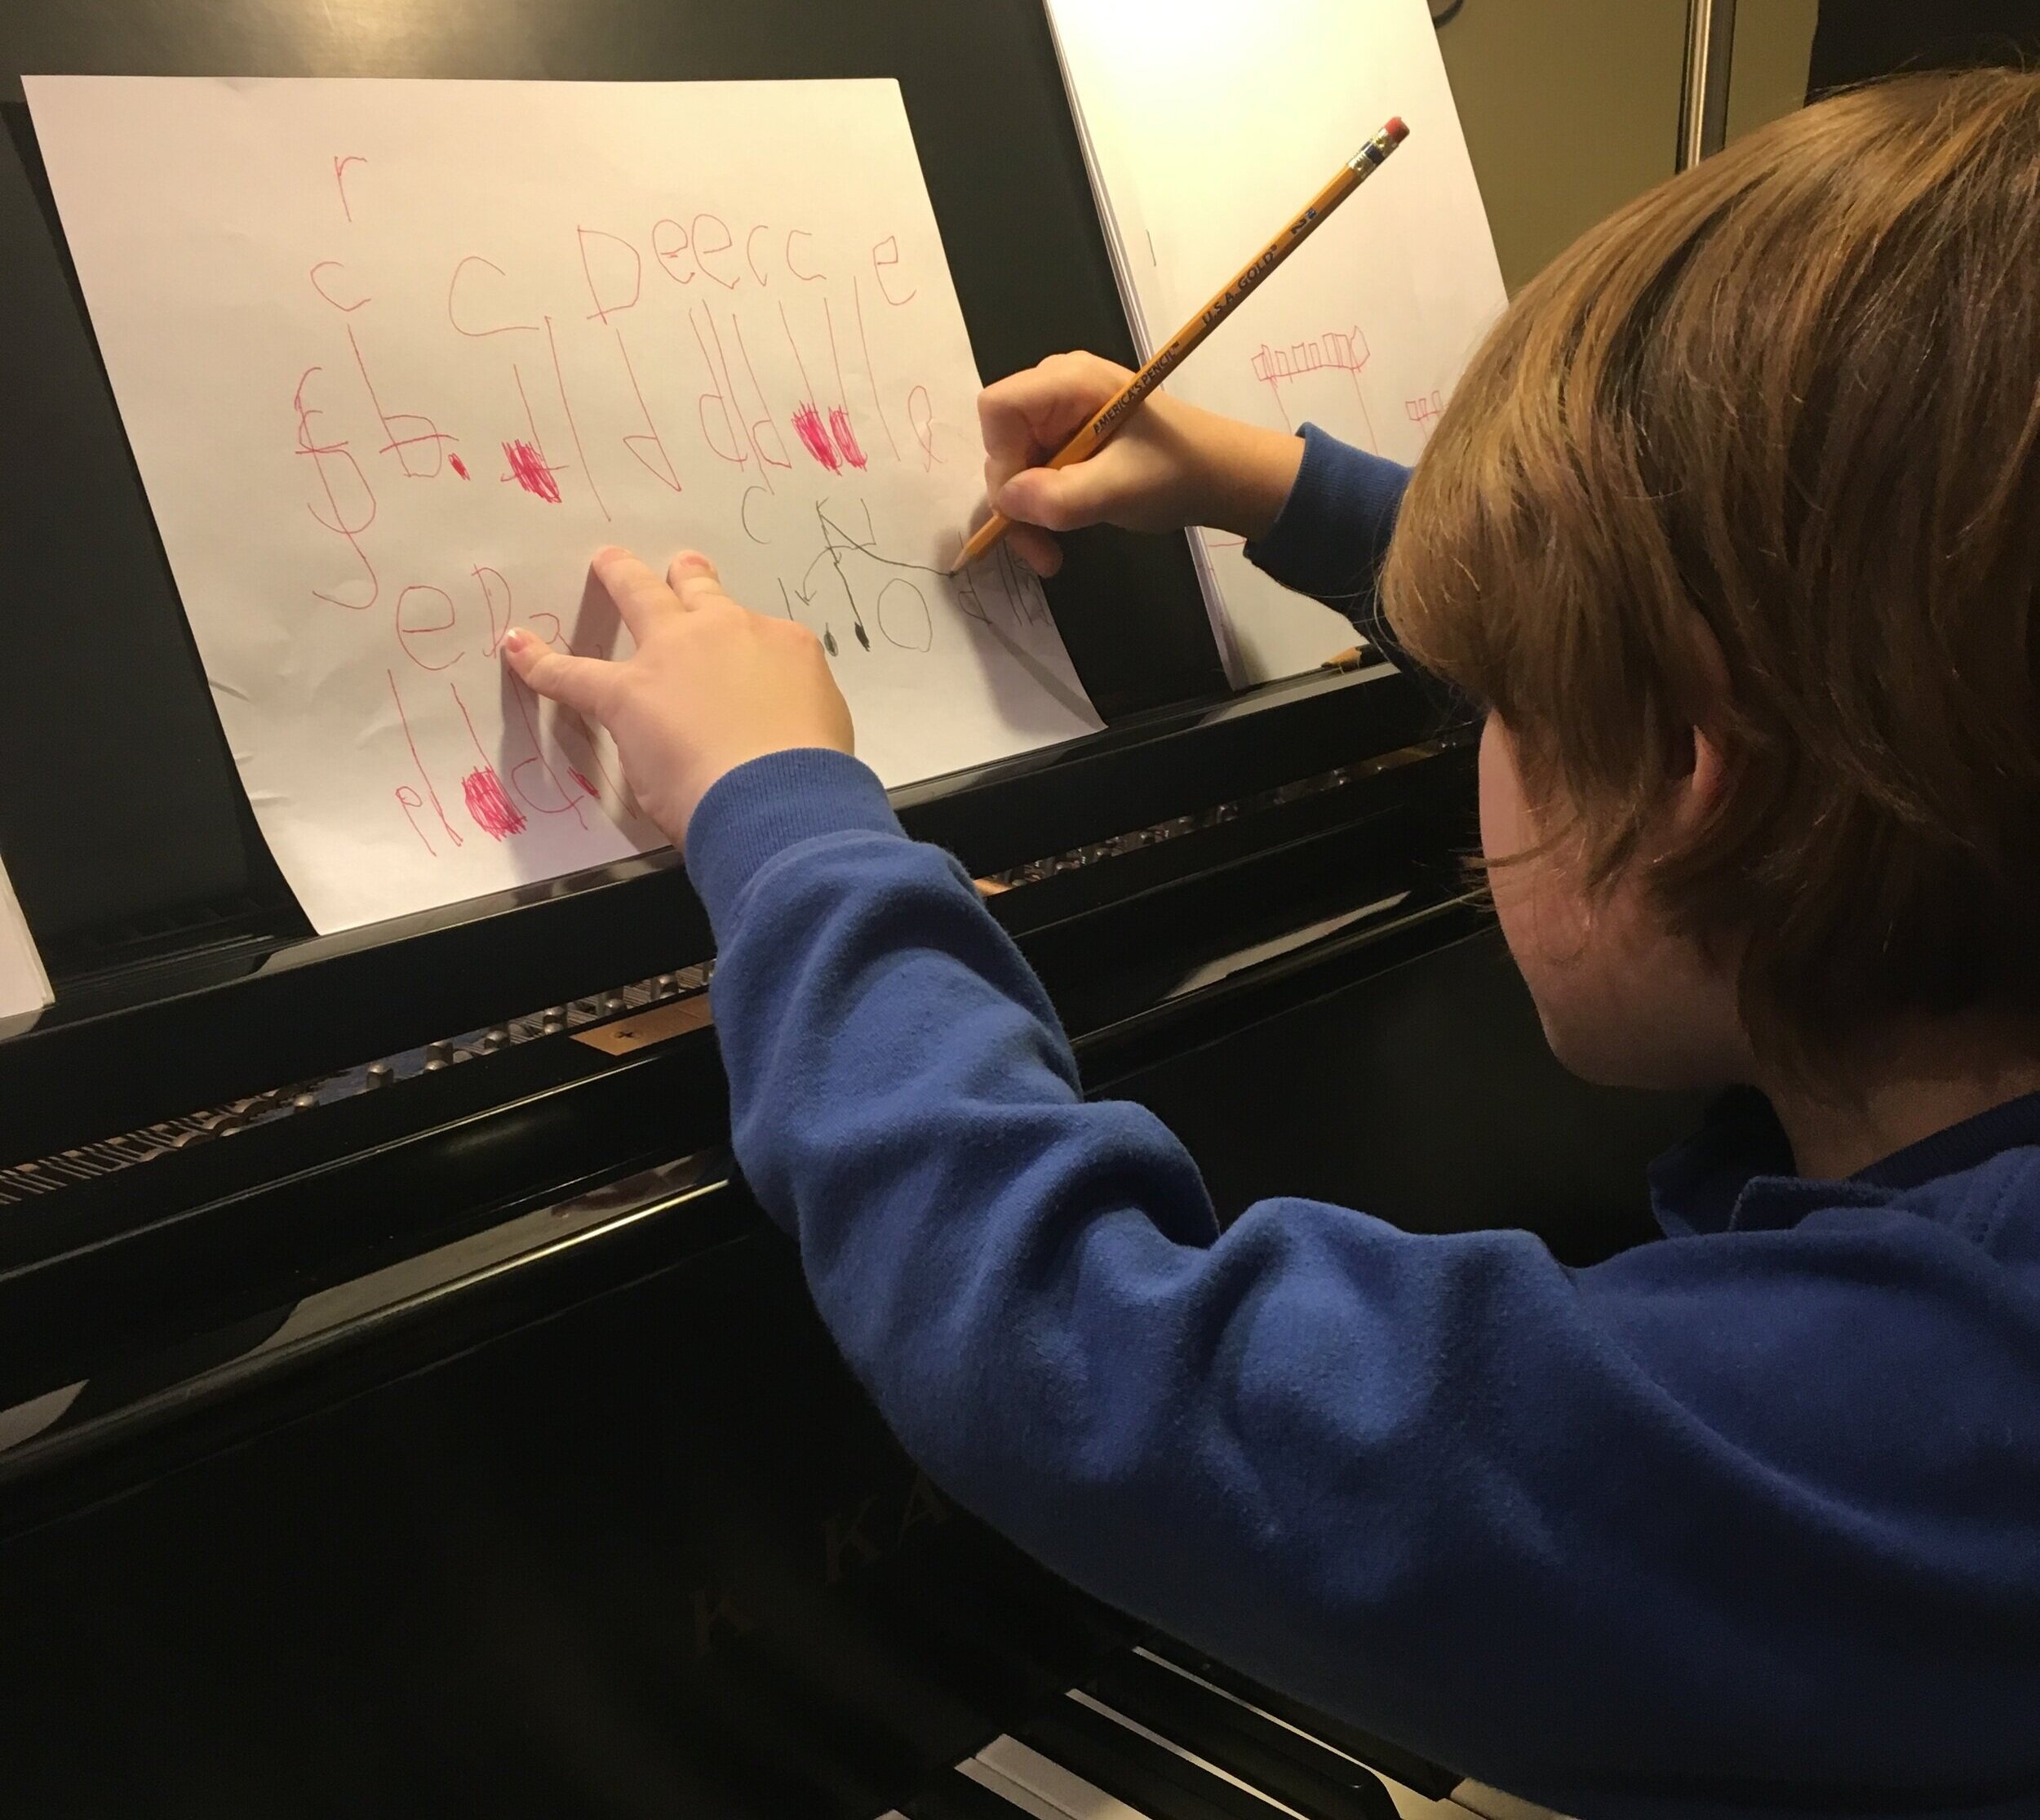   Music lessons for kids ages 3-6    Introduce your child to the joy of making music.    CALL  651-263-9475  TO SCHEDULE YOUR FIRST LESSON   REQUEST INFO  